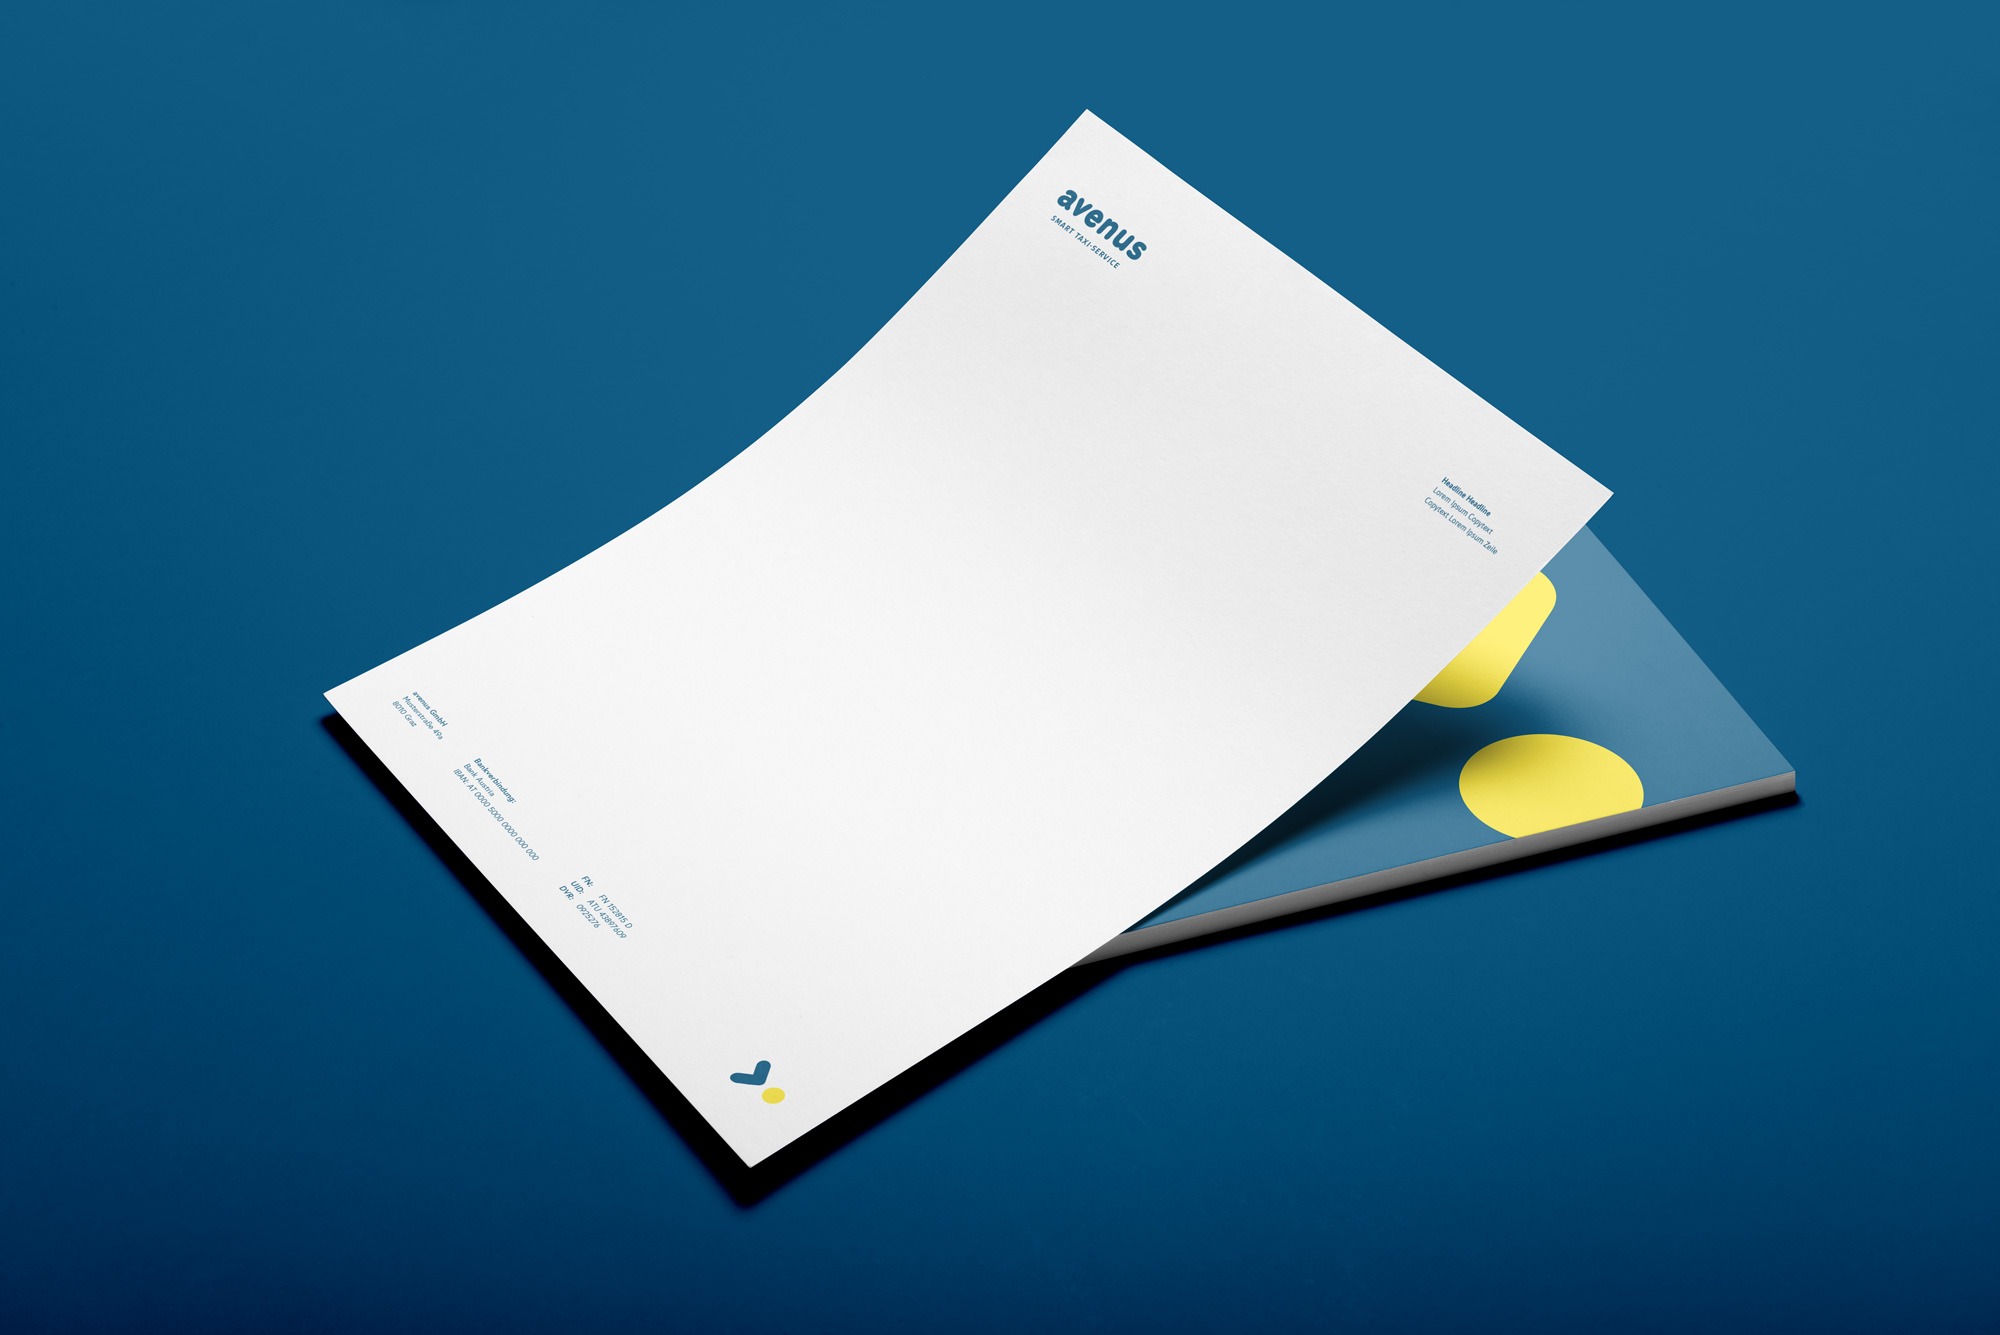 A yellow letterhead on a blue background.